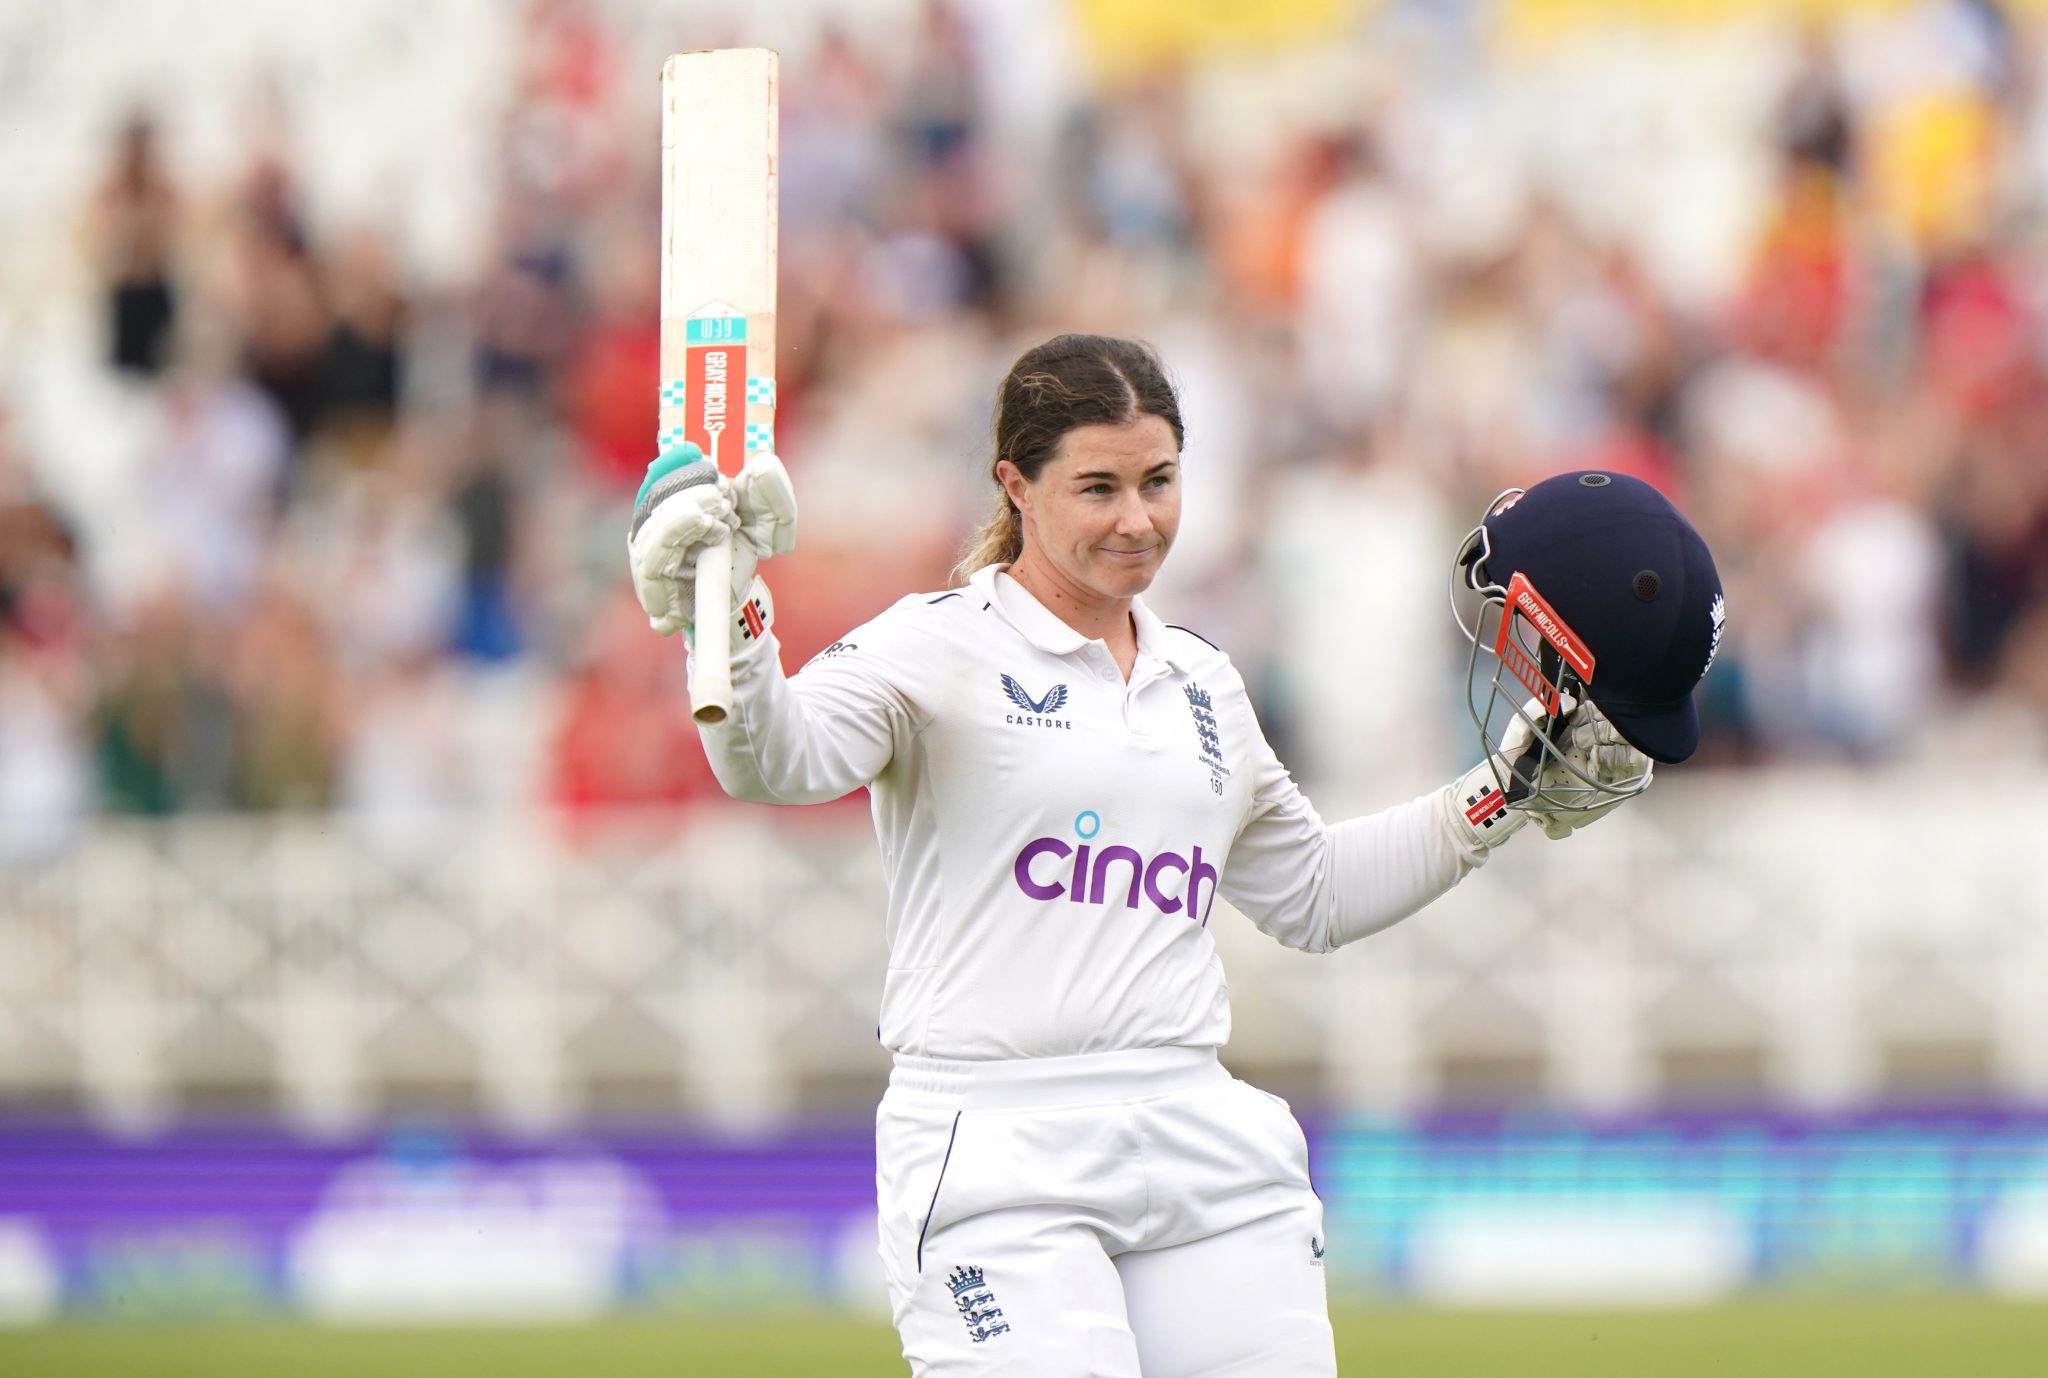 Tammy Beaumont and Lauren Filer return for England ahead of Women’s Ashes ODIs